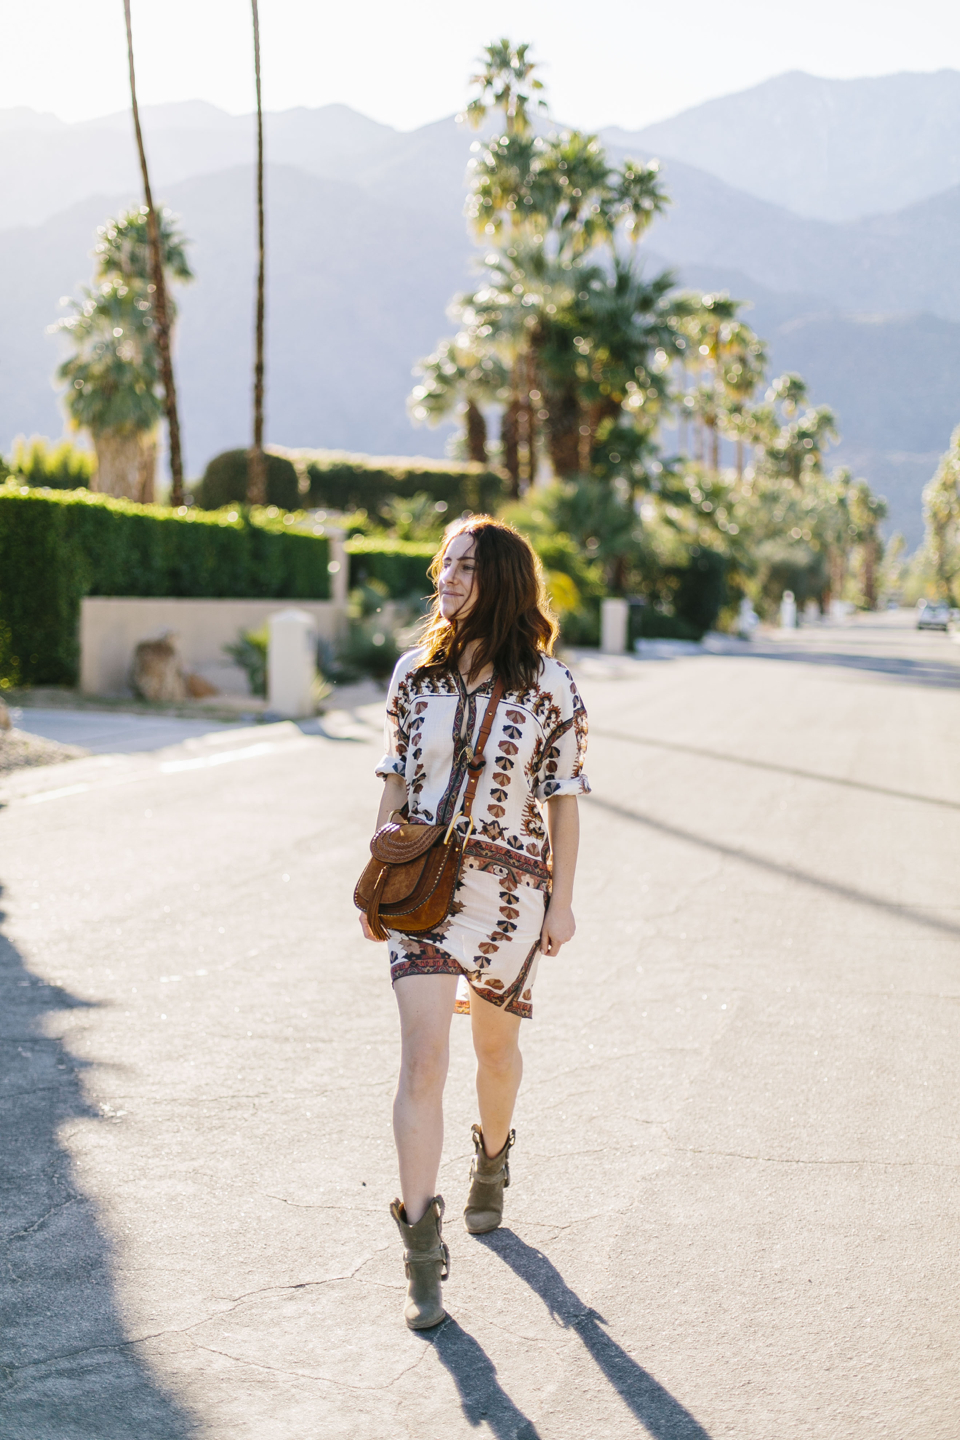 what to wear in palm springs